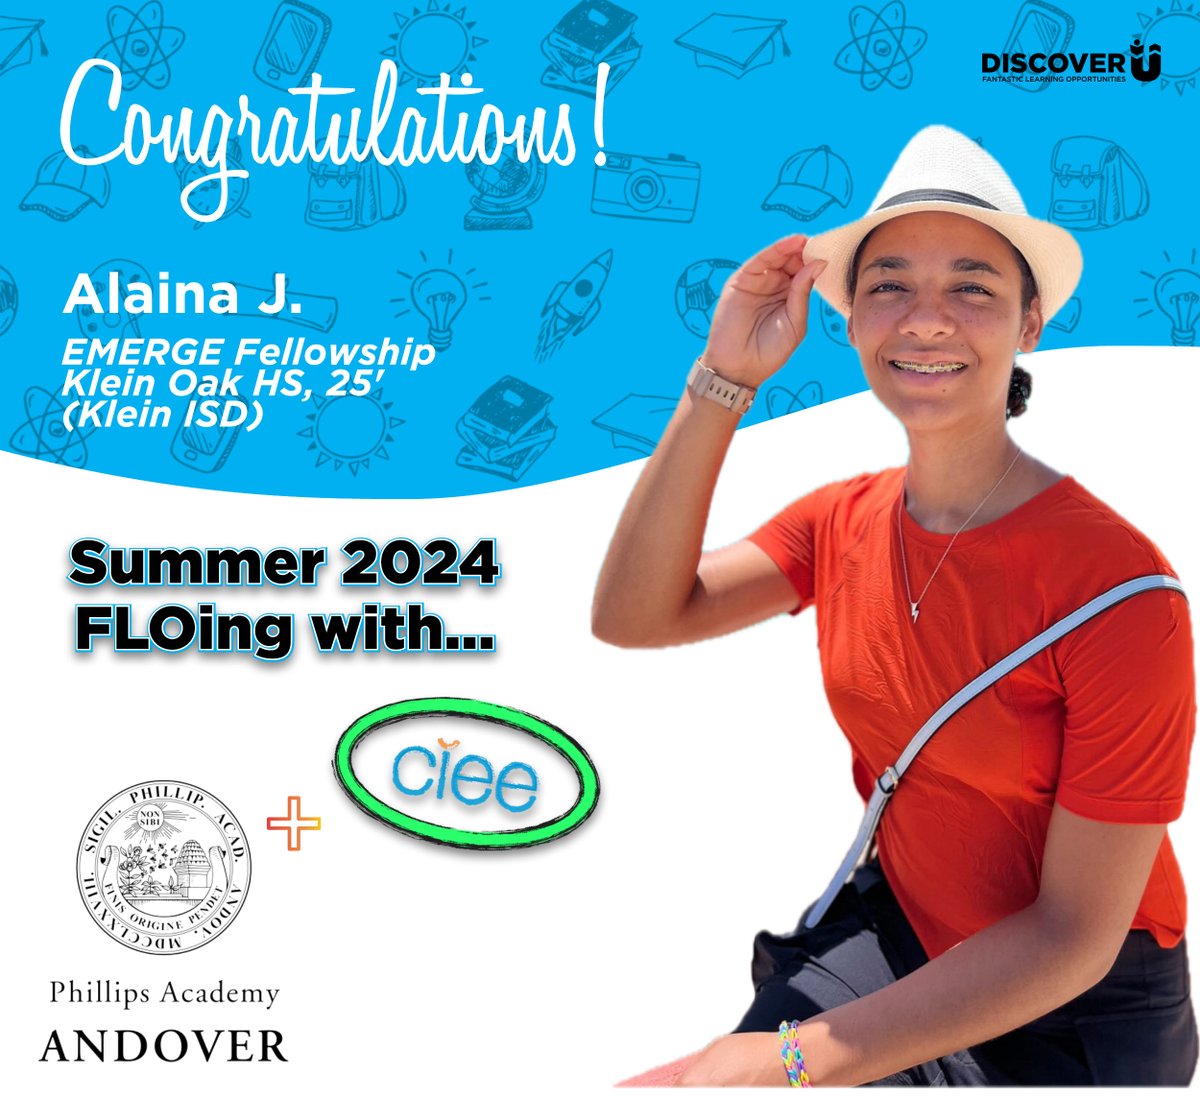 Meet Alaina, a @KleinOak and @emergevillage standout! Accepted to two FLOs for summer 2024, she's off to Spain with @CIEESeville and @Andover_Summer  at @phillipsacademy in Massachusetts. Ready to conquer new horizons! 🌍✈️ #ExperienceMatters #DiscoverU